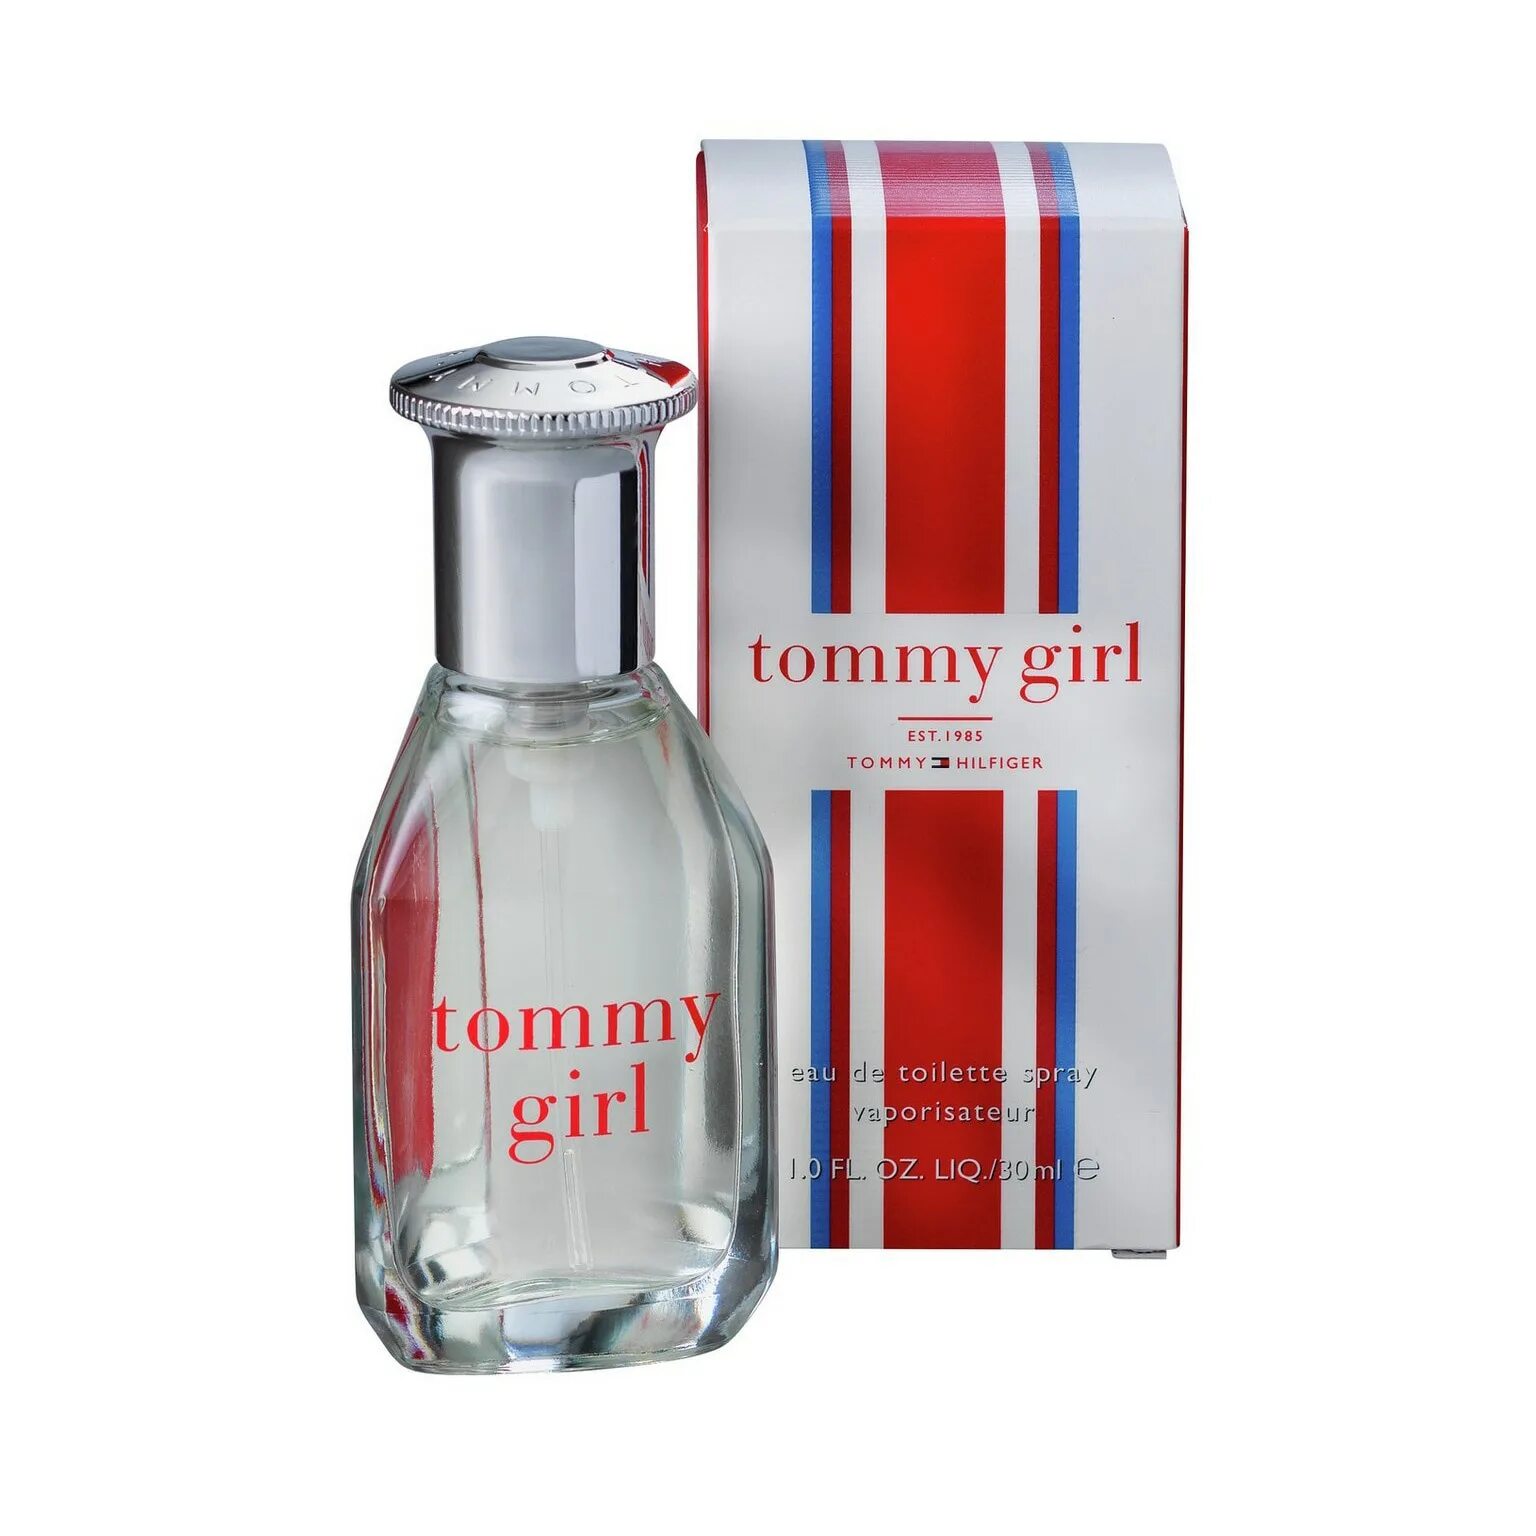 Tommy Hilfiger / Tommy girl 30 мл. Tommy Hilfiger духи женские Tommy girl. Tommy Hilfiger Tommy girl 10 100ml. Tommy girl туалетная вода 30 мл.